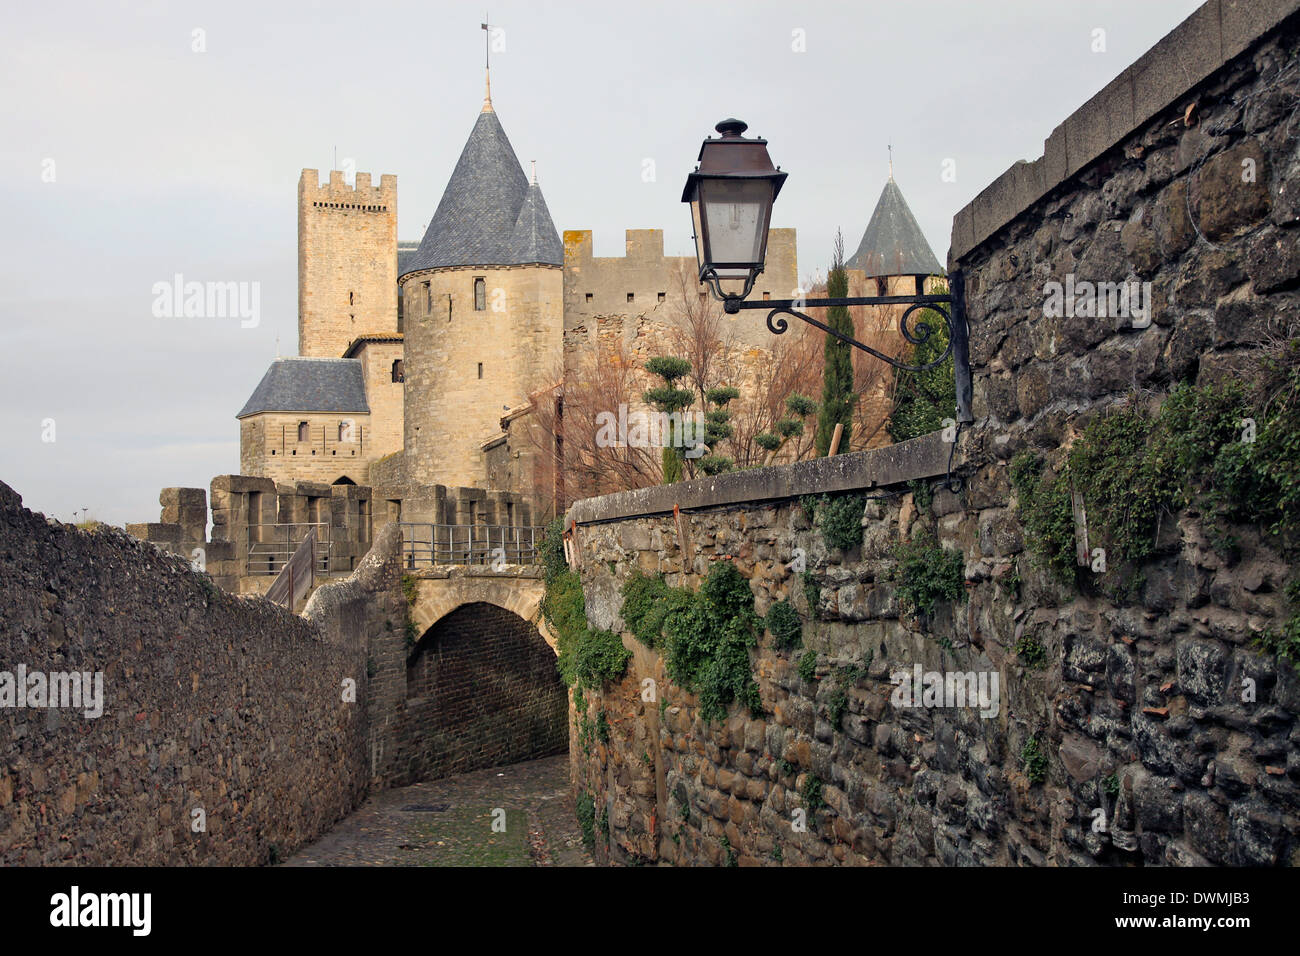 The ancient fortified city of Carcassone, UNESCO World Heritage Site, Languedoc-Roussillon, France, Europe Stock Photo